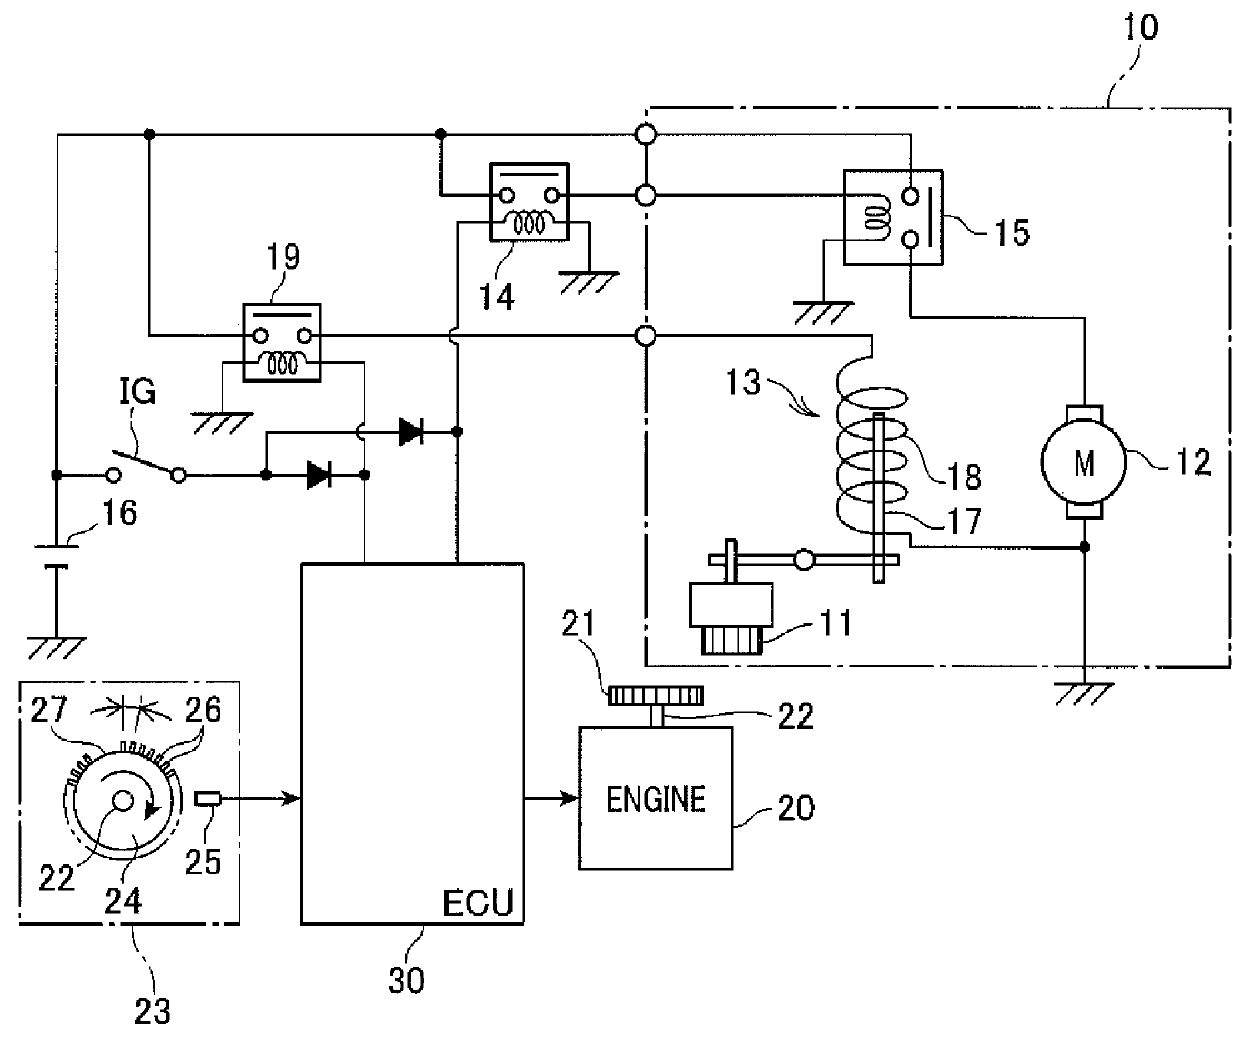 Engine control system designed to predict engine speed accurately